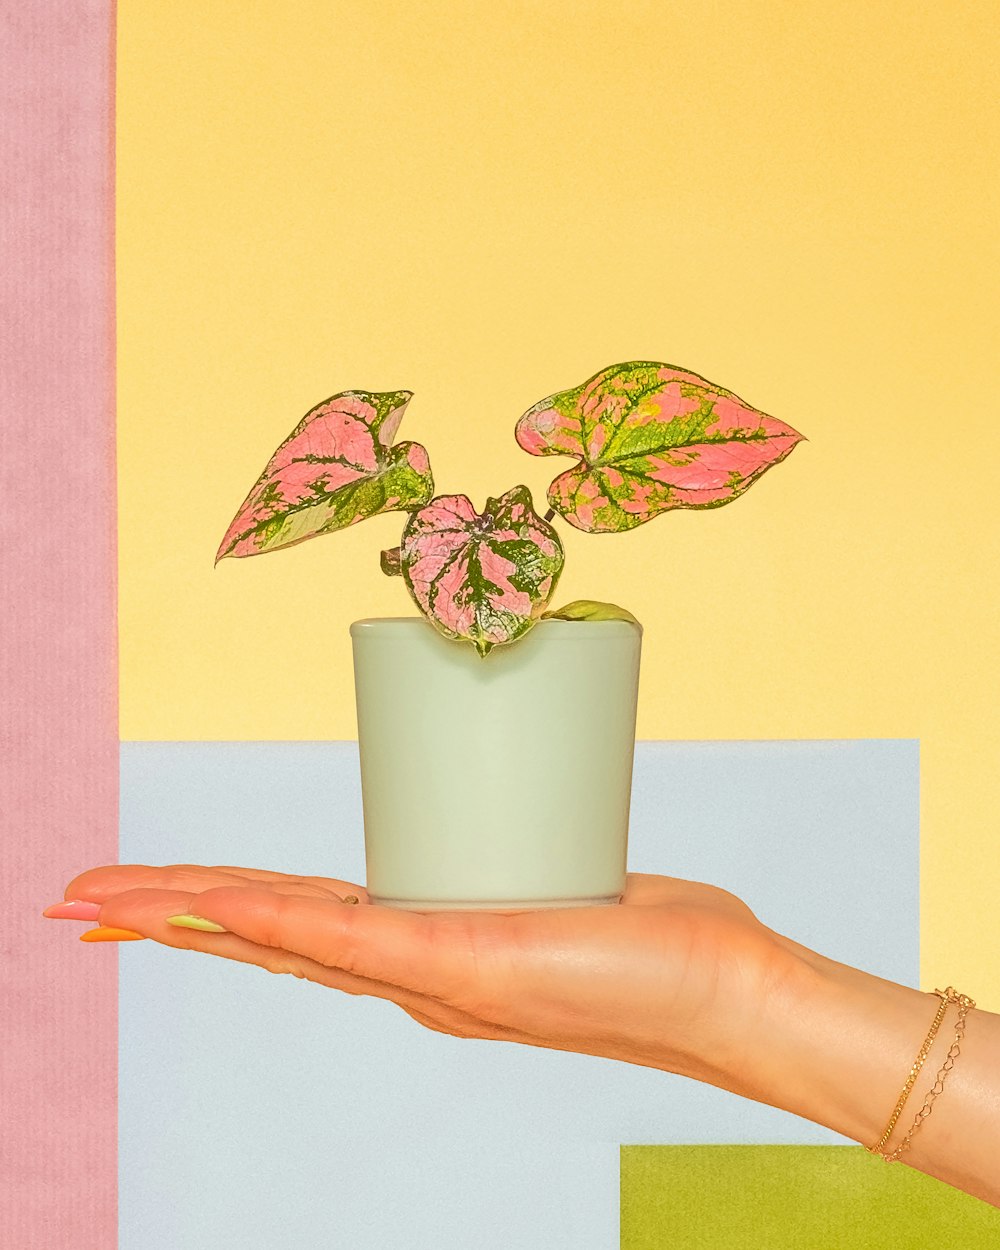 a hand holding a potted plant with pink and green leaves